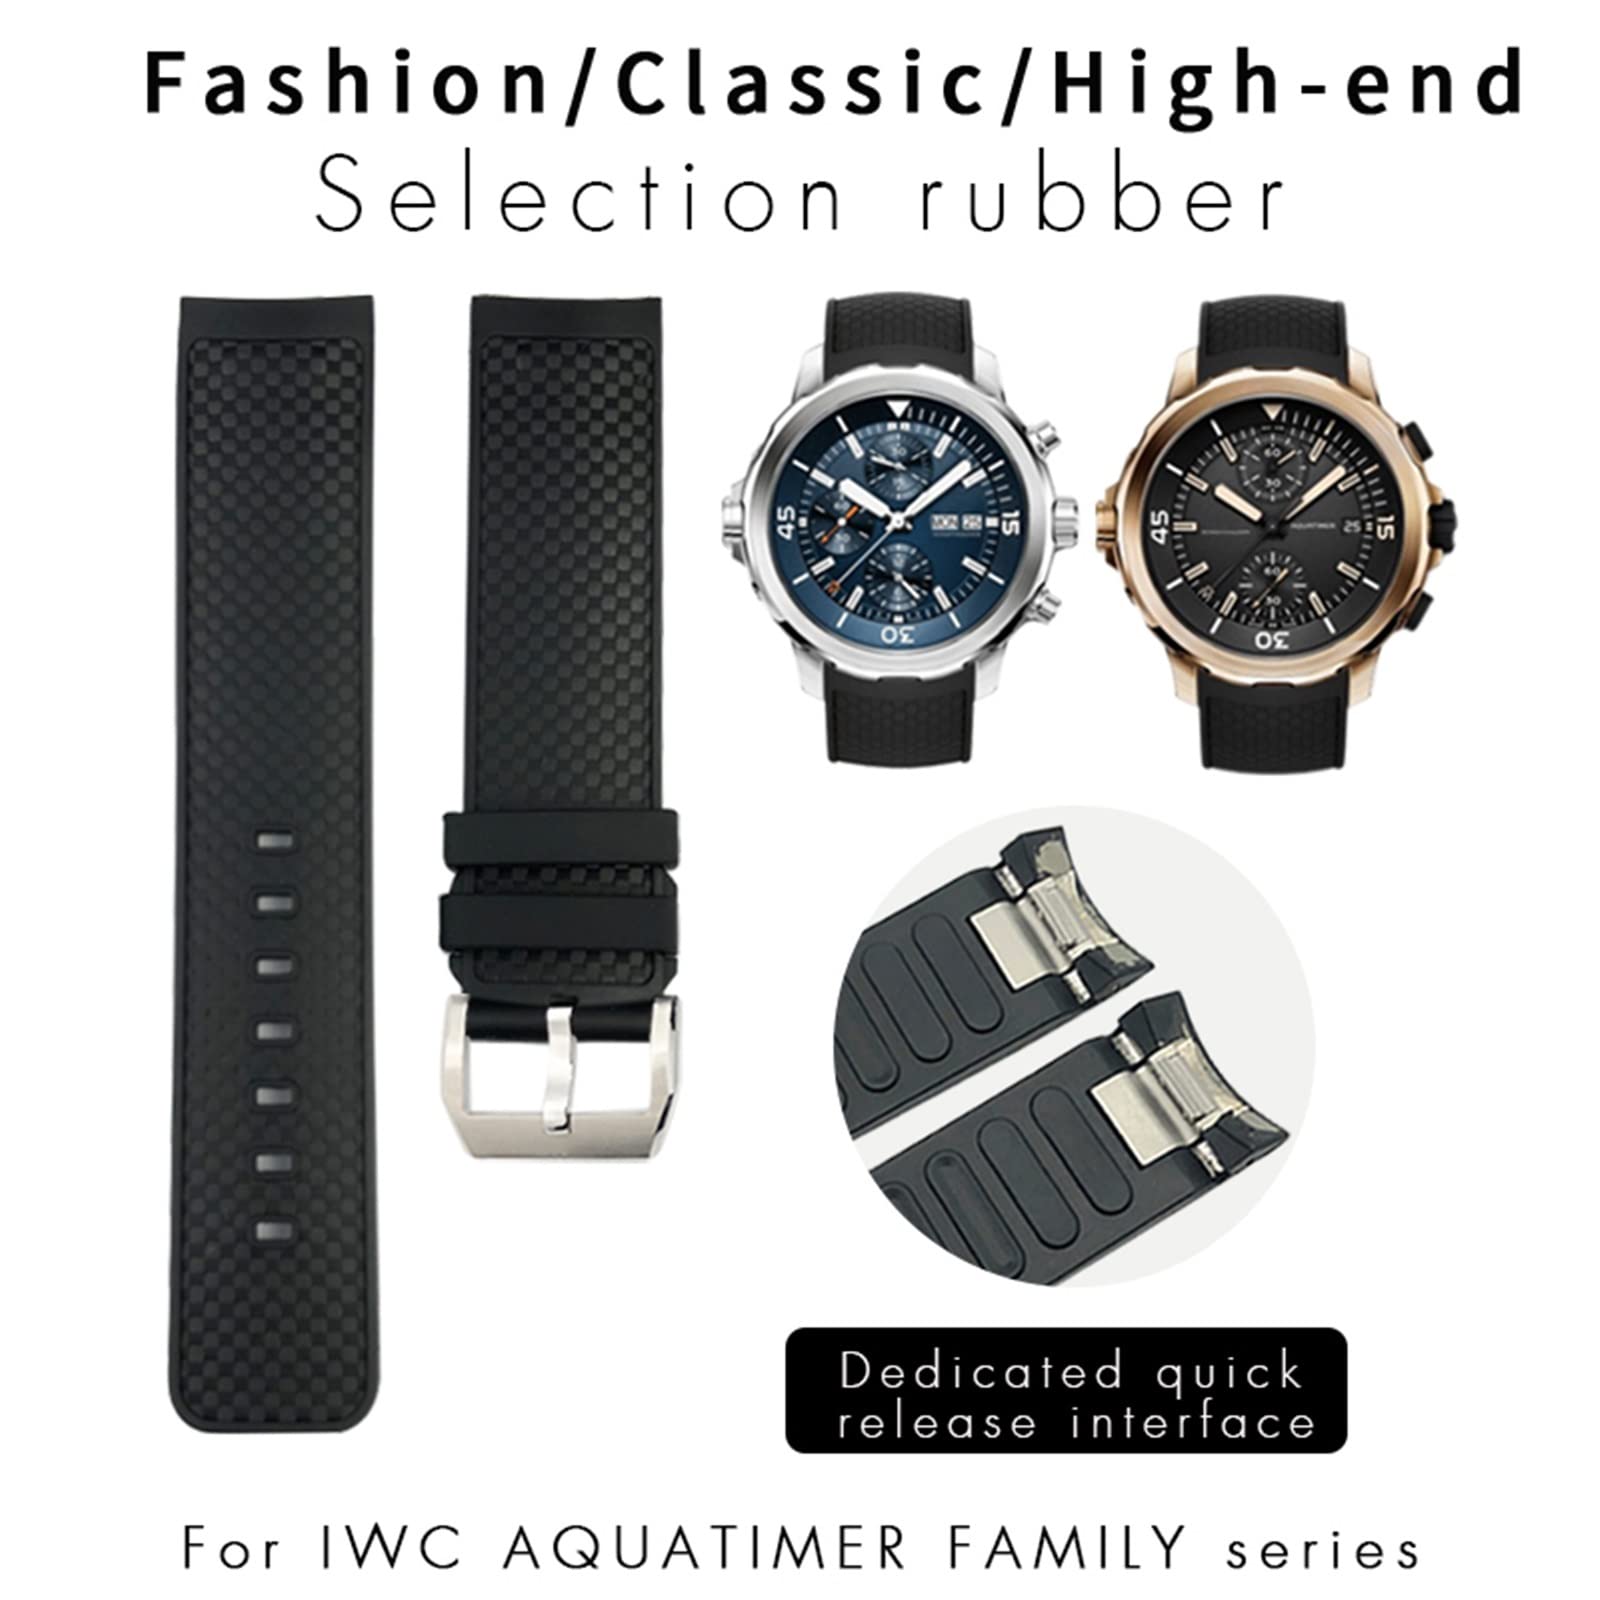 Wscebck 22mm Rubber Watchband Fit for IWC AQUATIMER Family IW376805 IW329001 Quick Release Waterproof Watch Strap